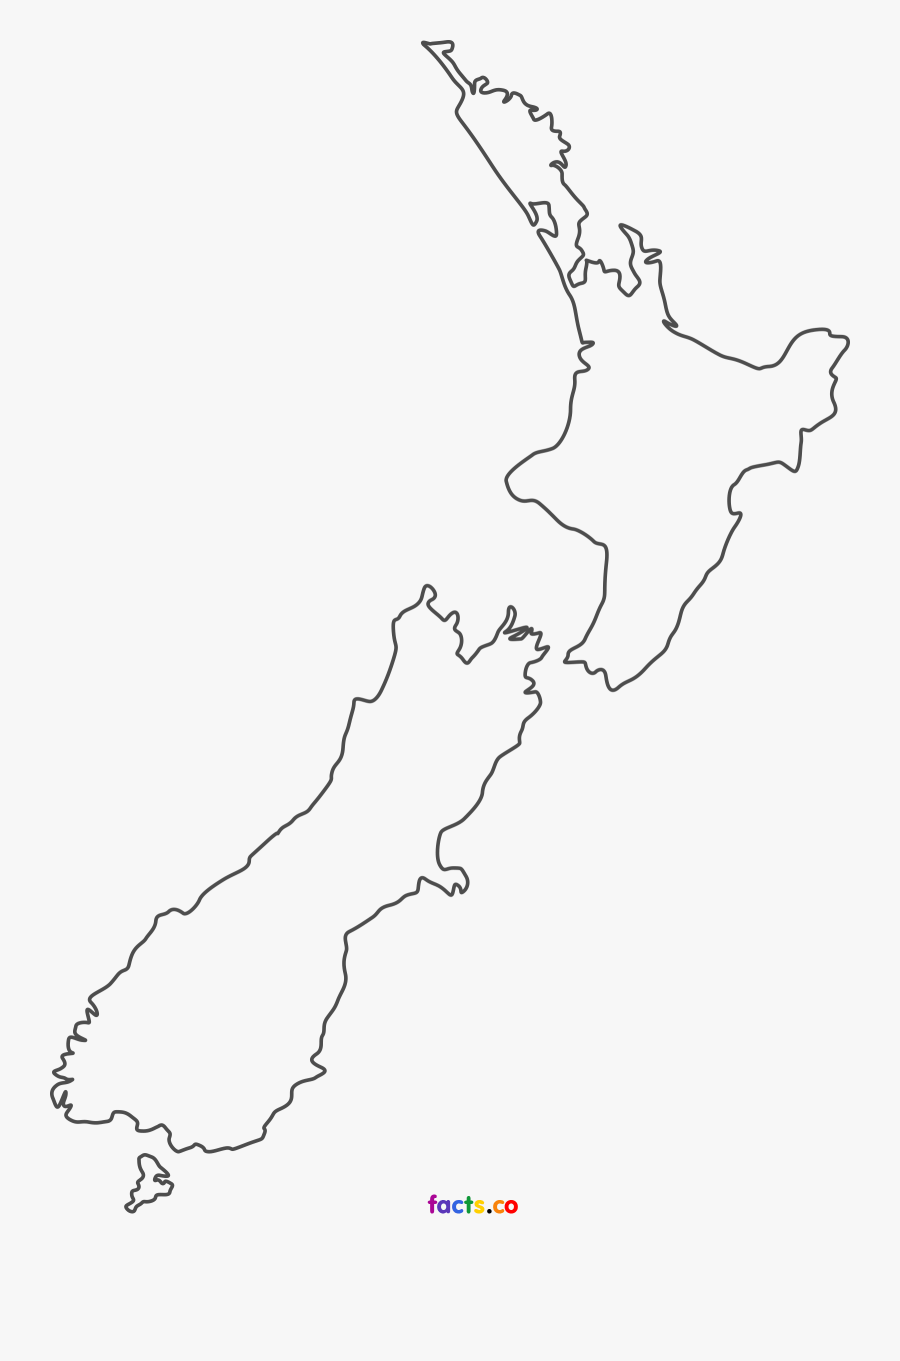 New Blank Political With - Nz Black And White, Transparent Clipart